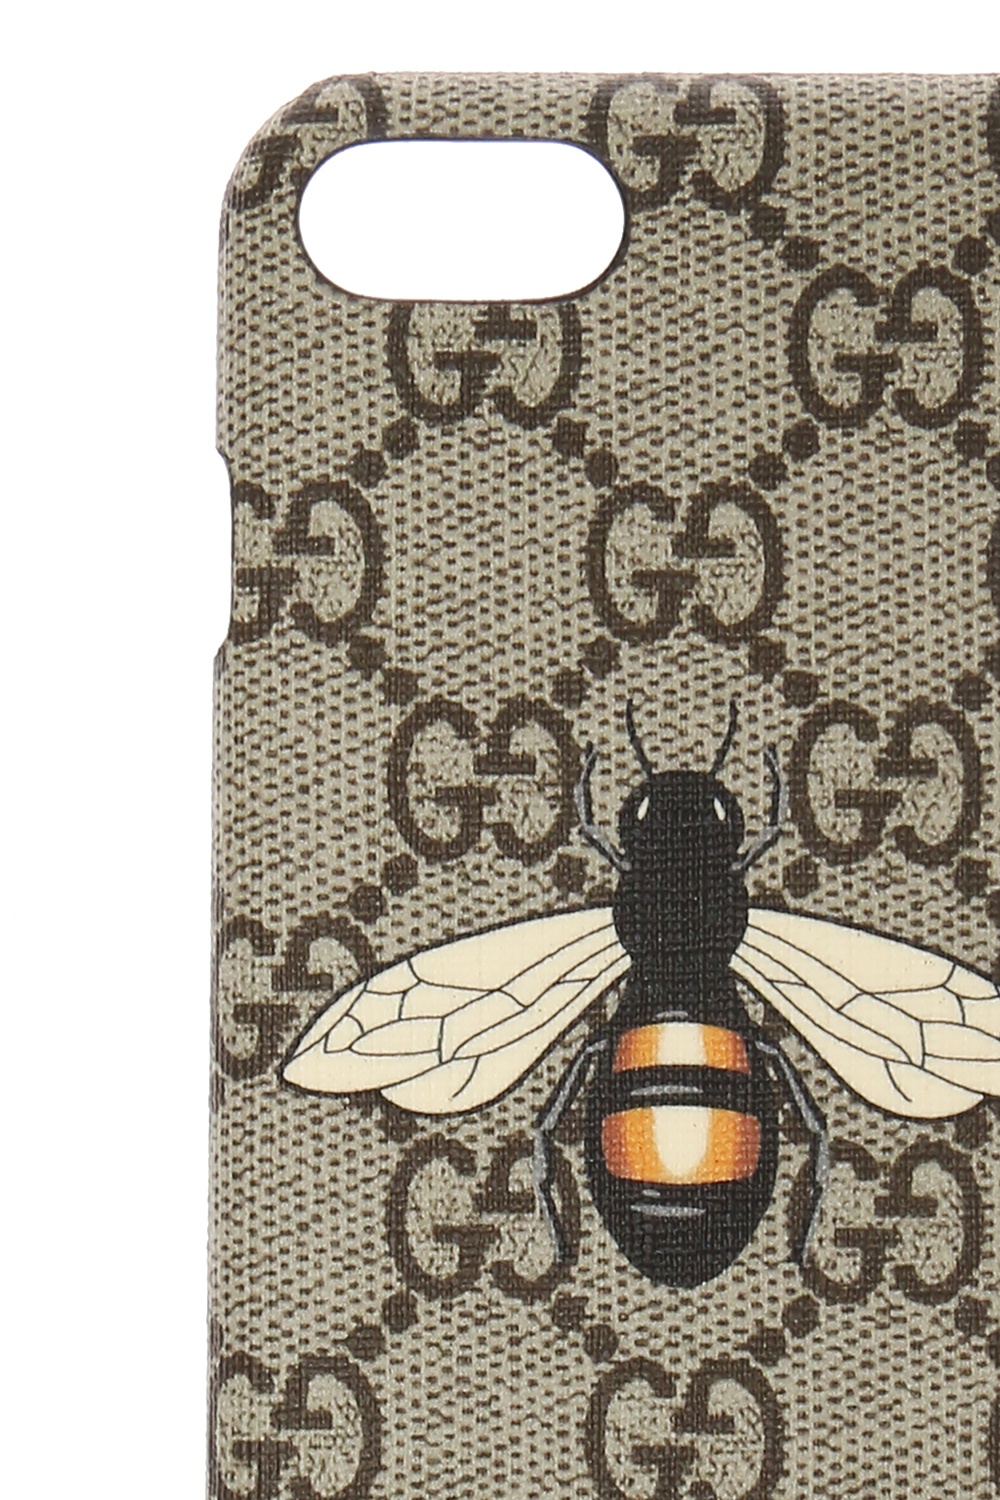 gucci phone cover